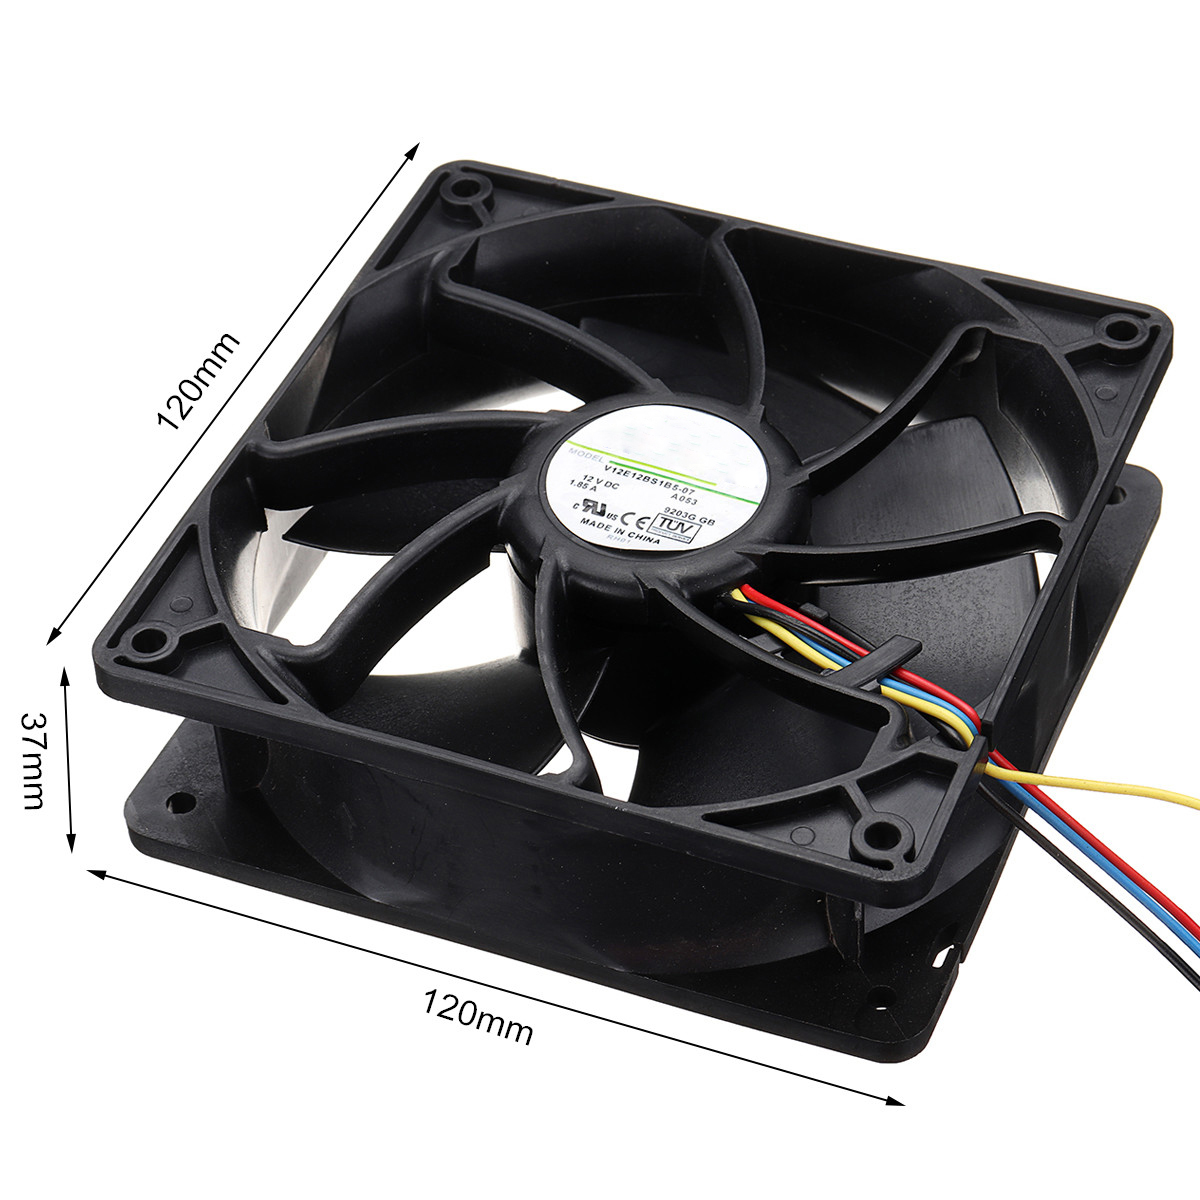 6500RPM-Cooling-Fan-Vovomay-Replacement-4-pin-Connector-for-Antminer-Bitmain-S7-S9-1386324-10